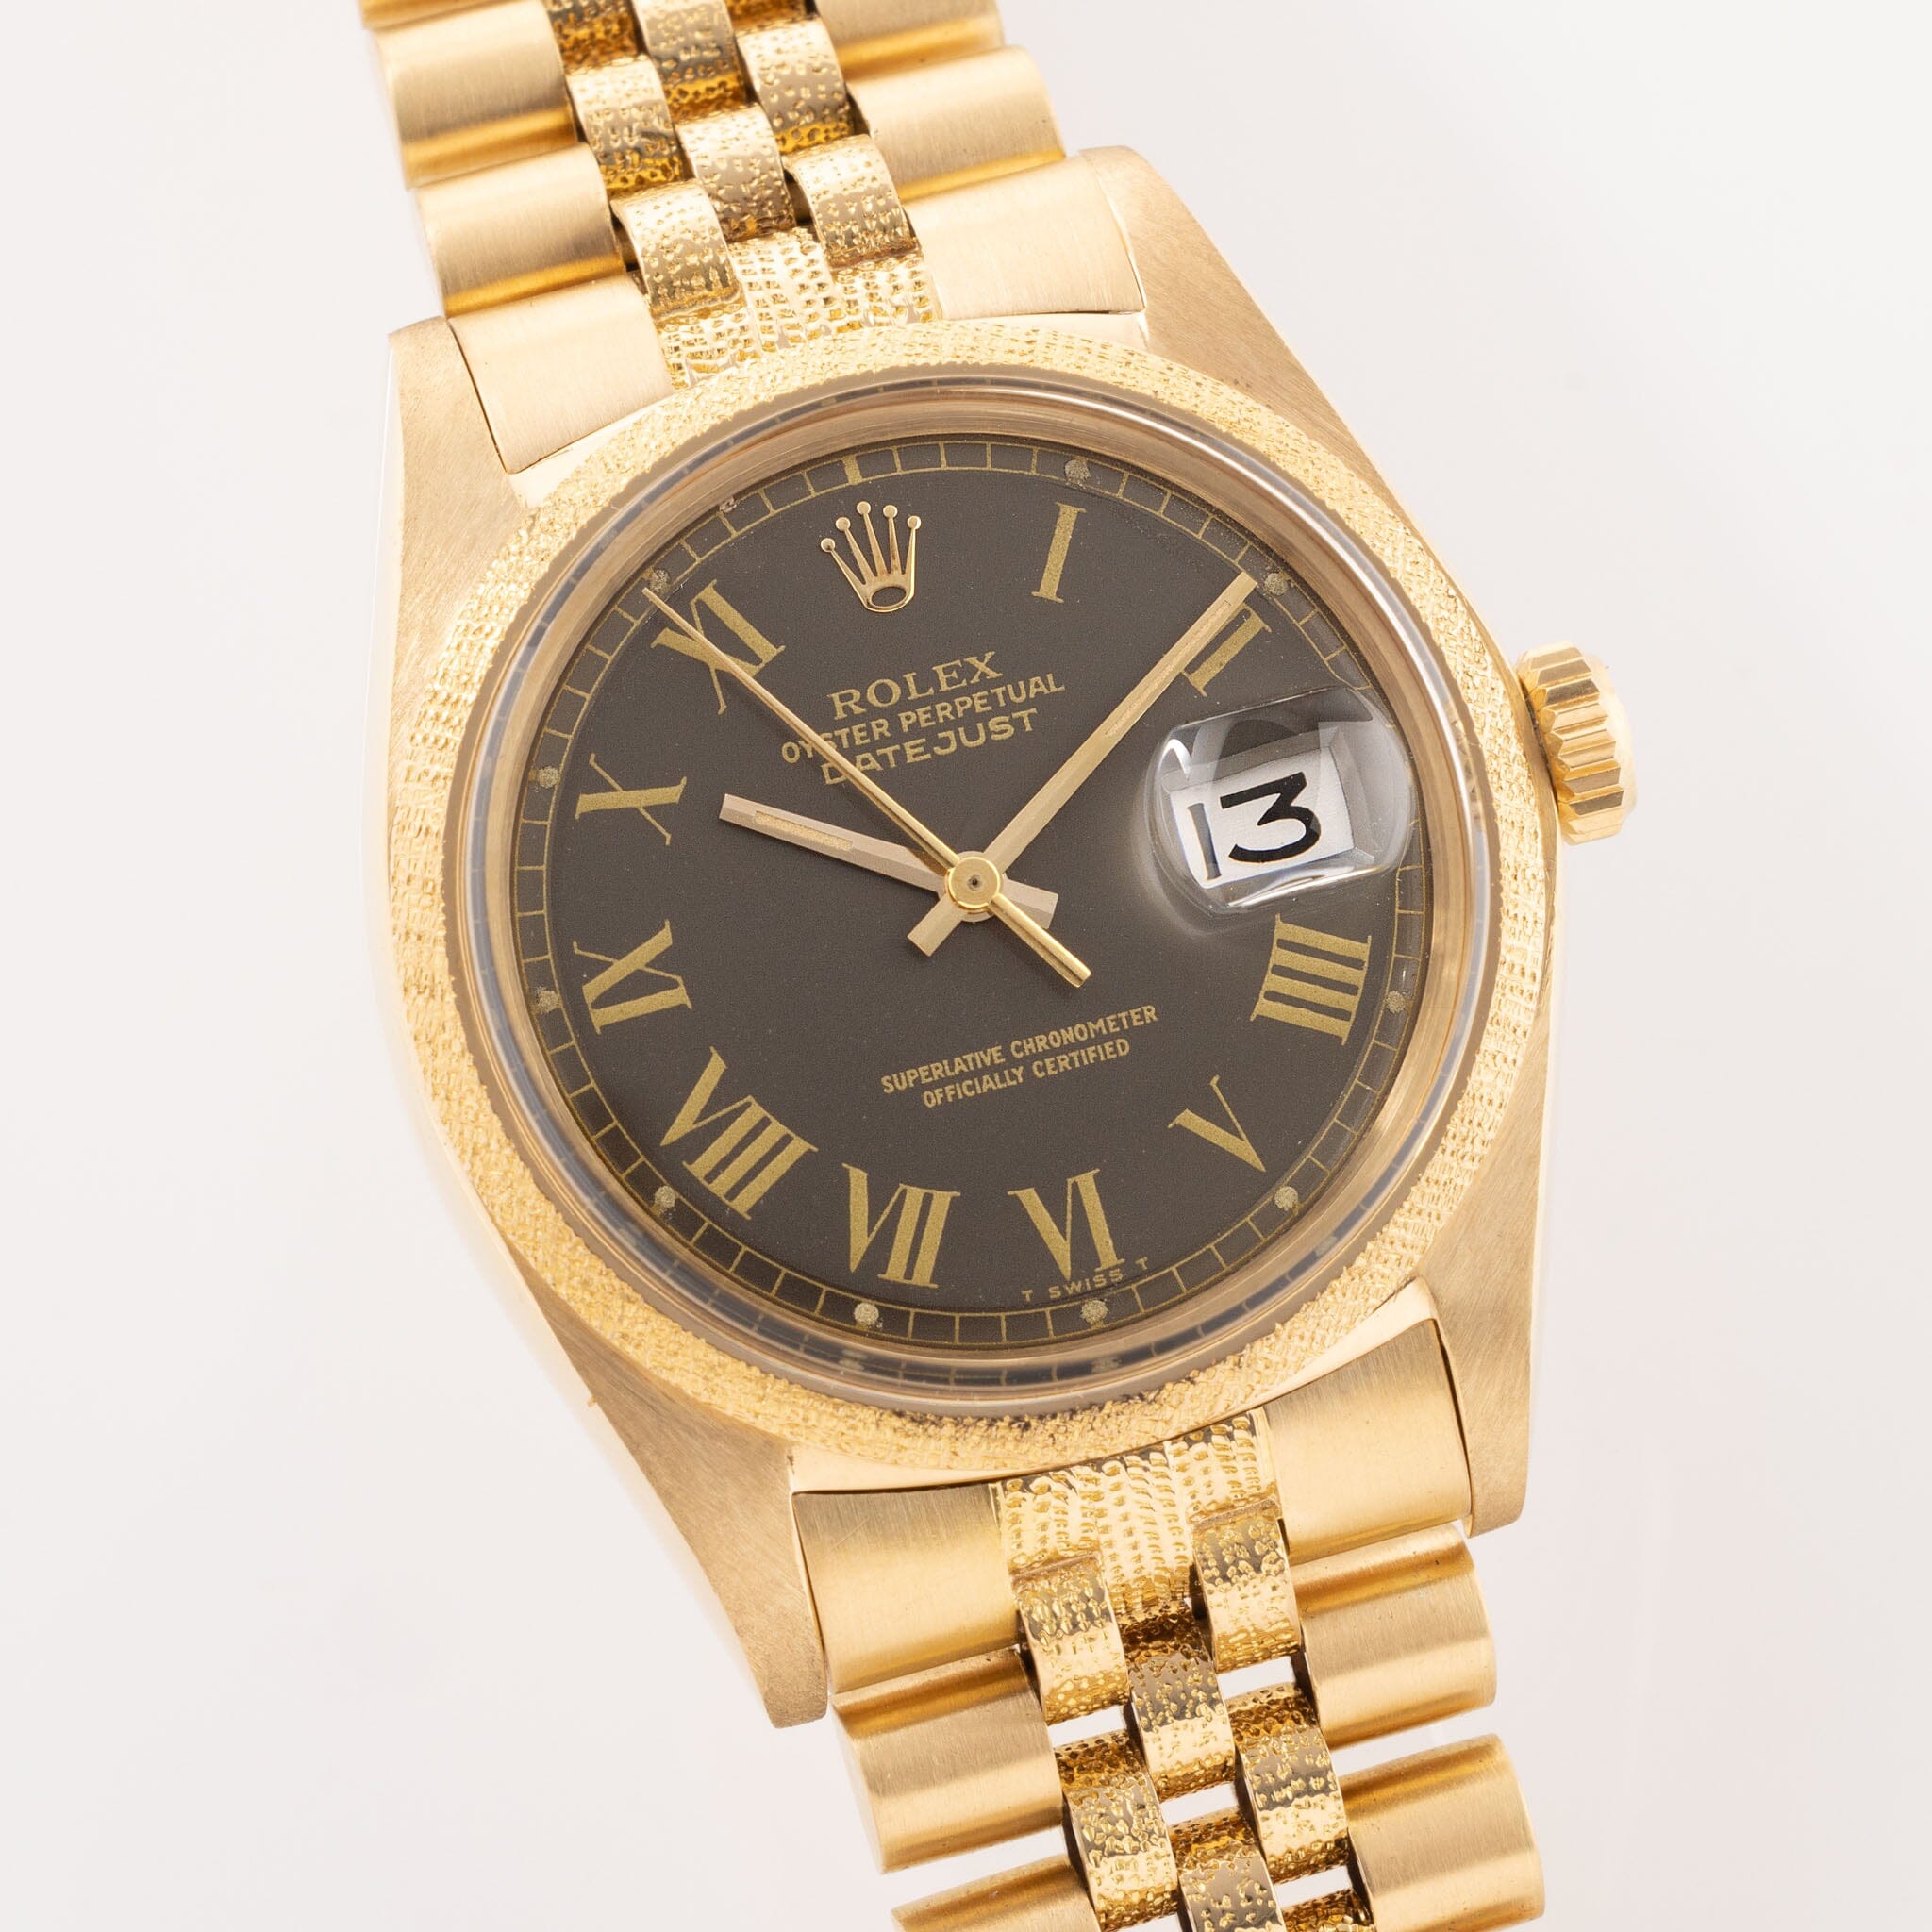 Datejust Colour changed Buckley dial Morellis finish ref 1611 Box and papers set